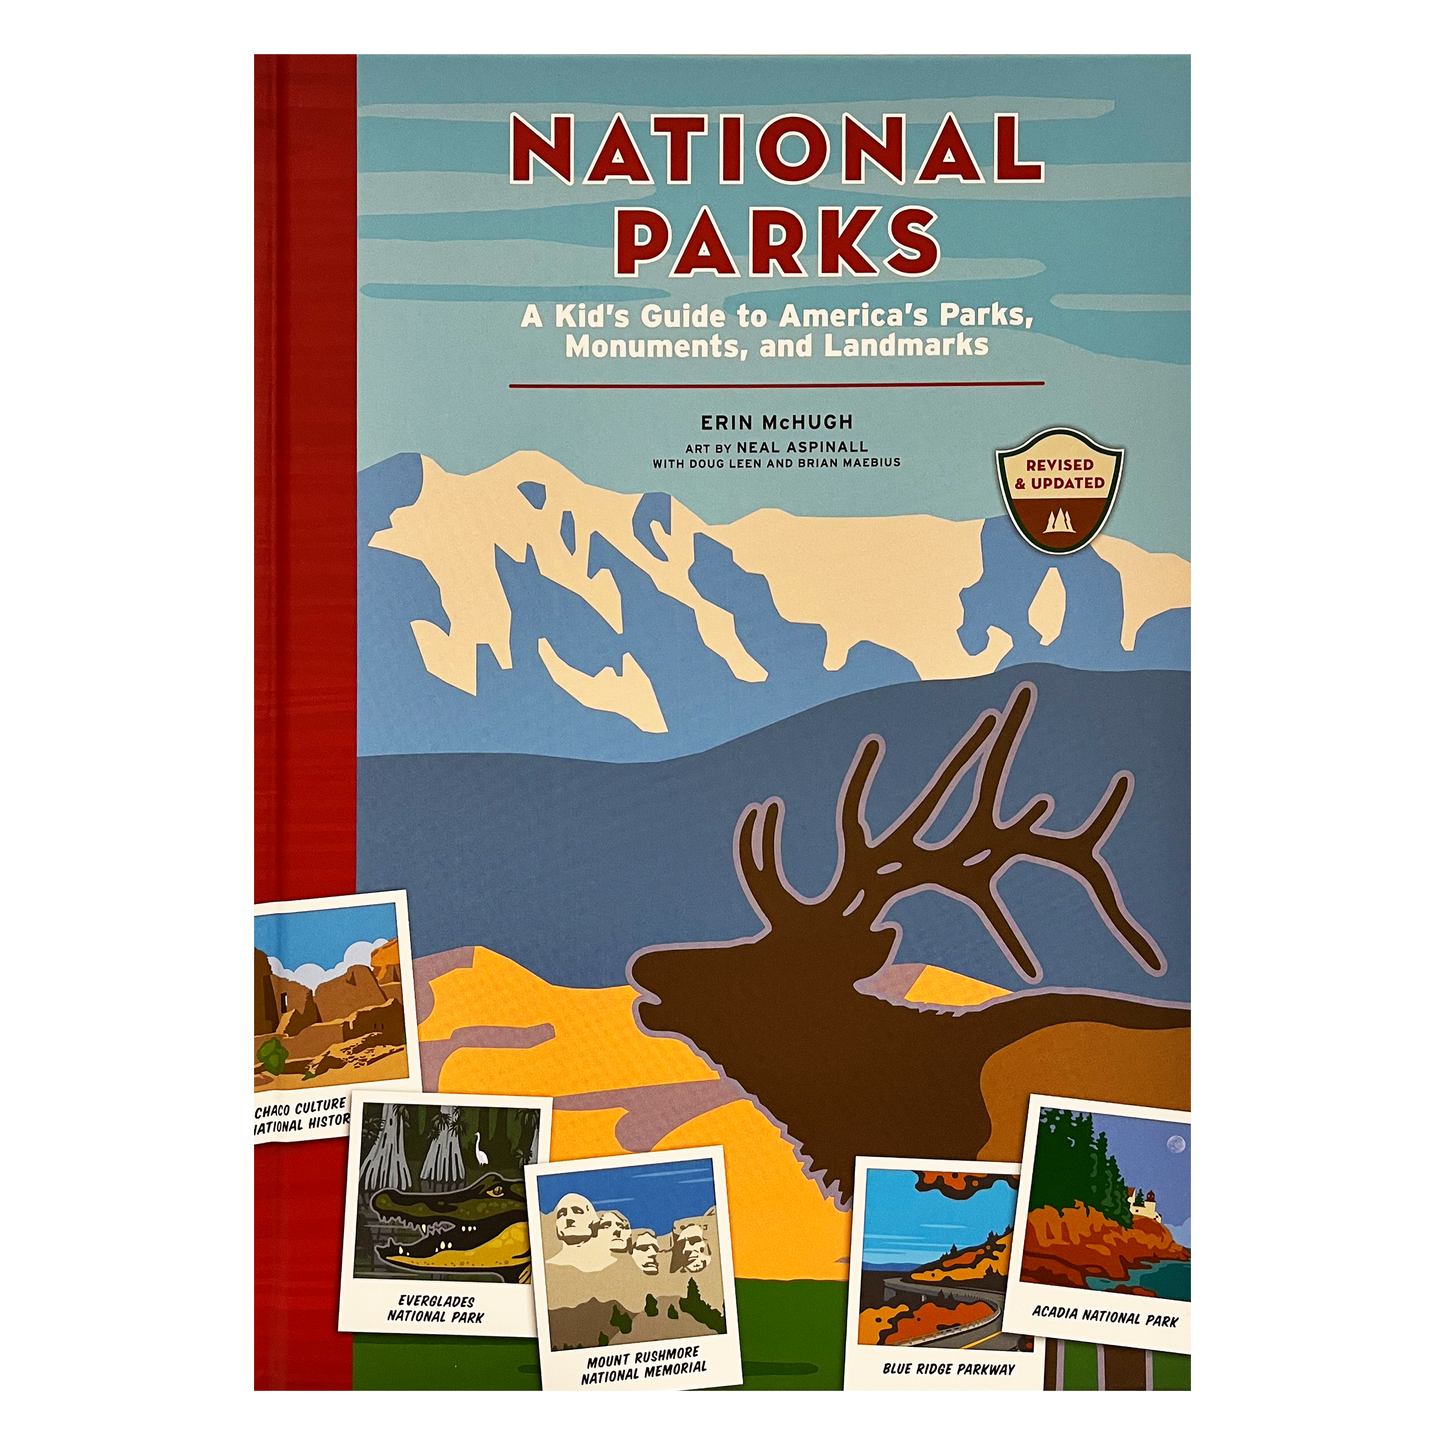 National Parks A Kids Guide to America's Parks, Monuments, and Landmarks